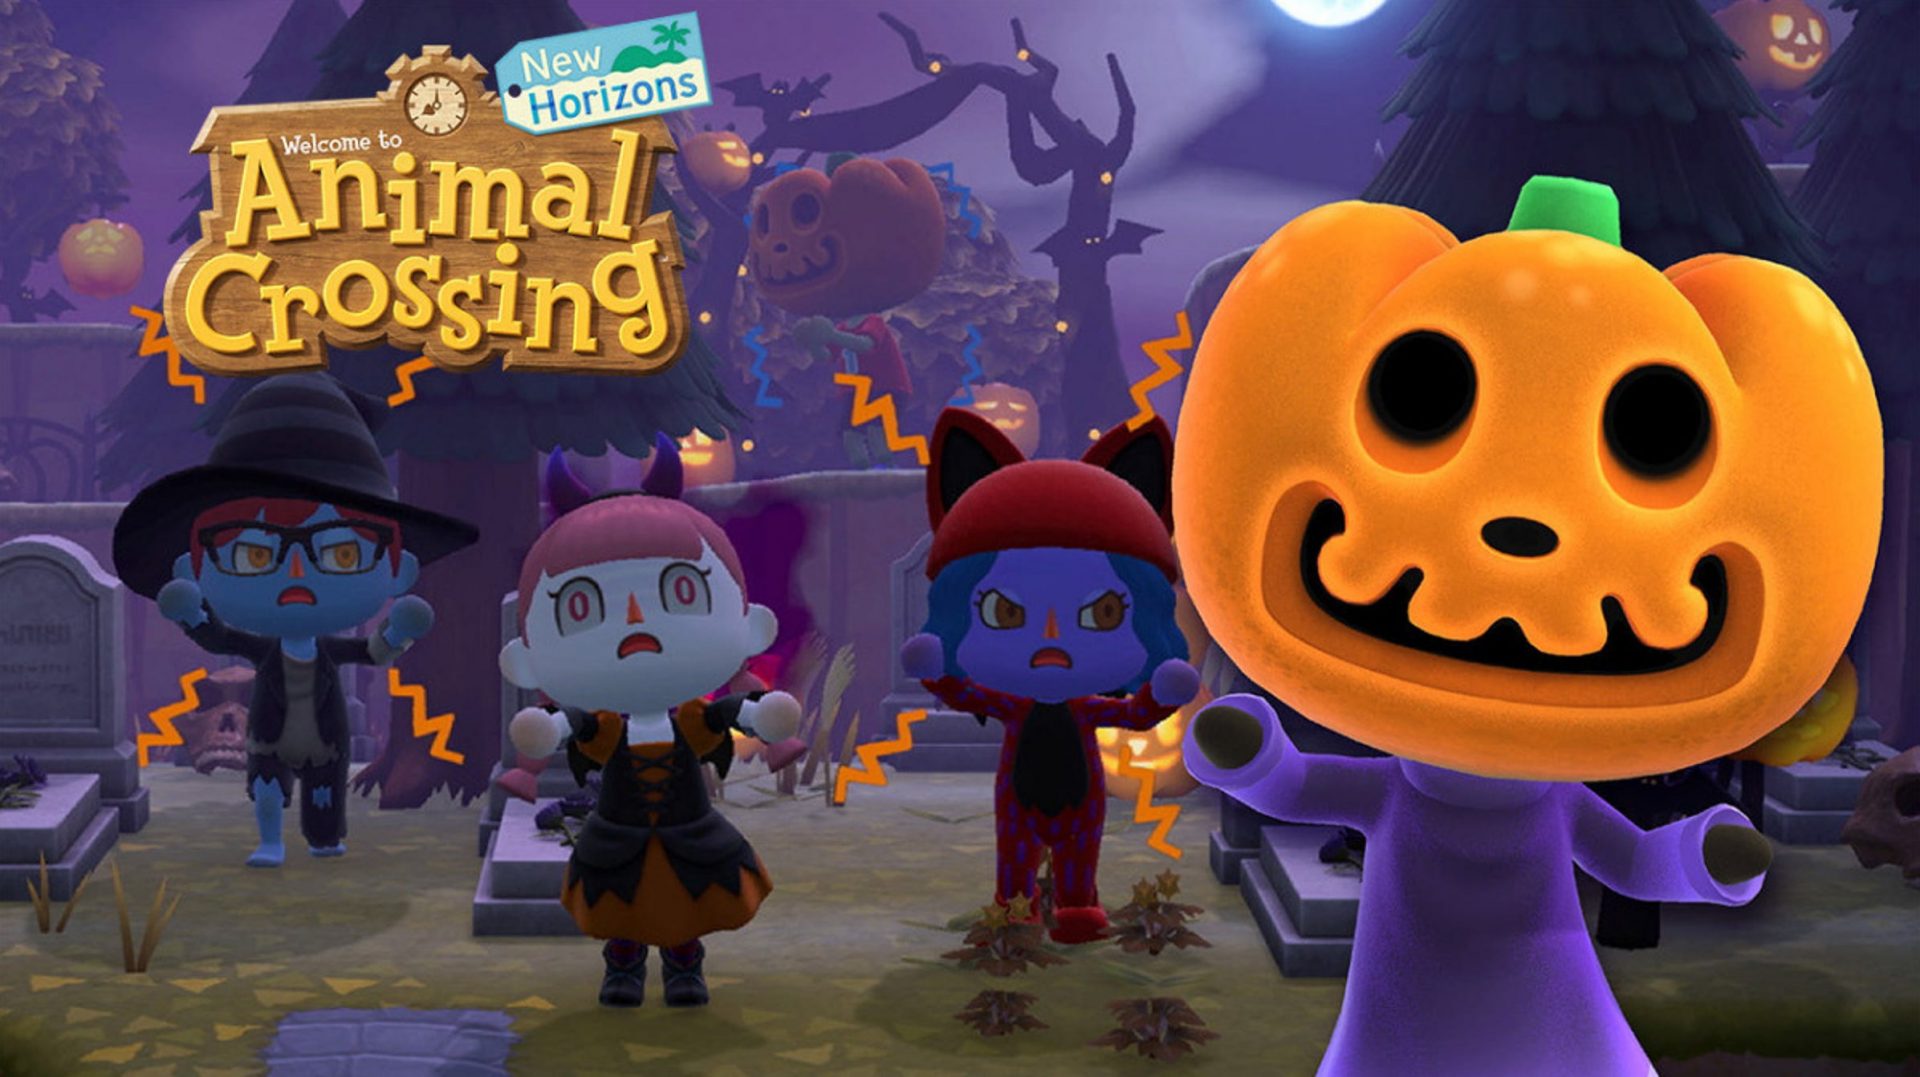 Programs to Trick-or-Kind out in ‘Animal Crossing: New Horizons’ for Halloween